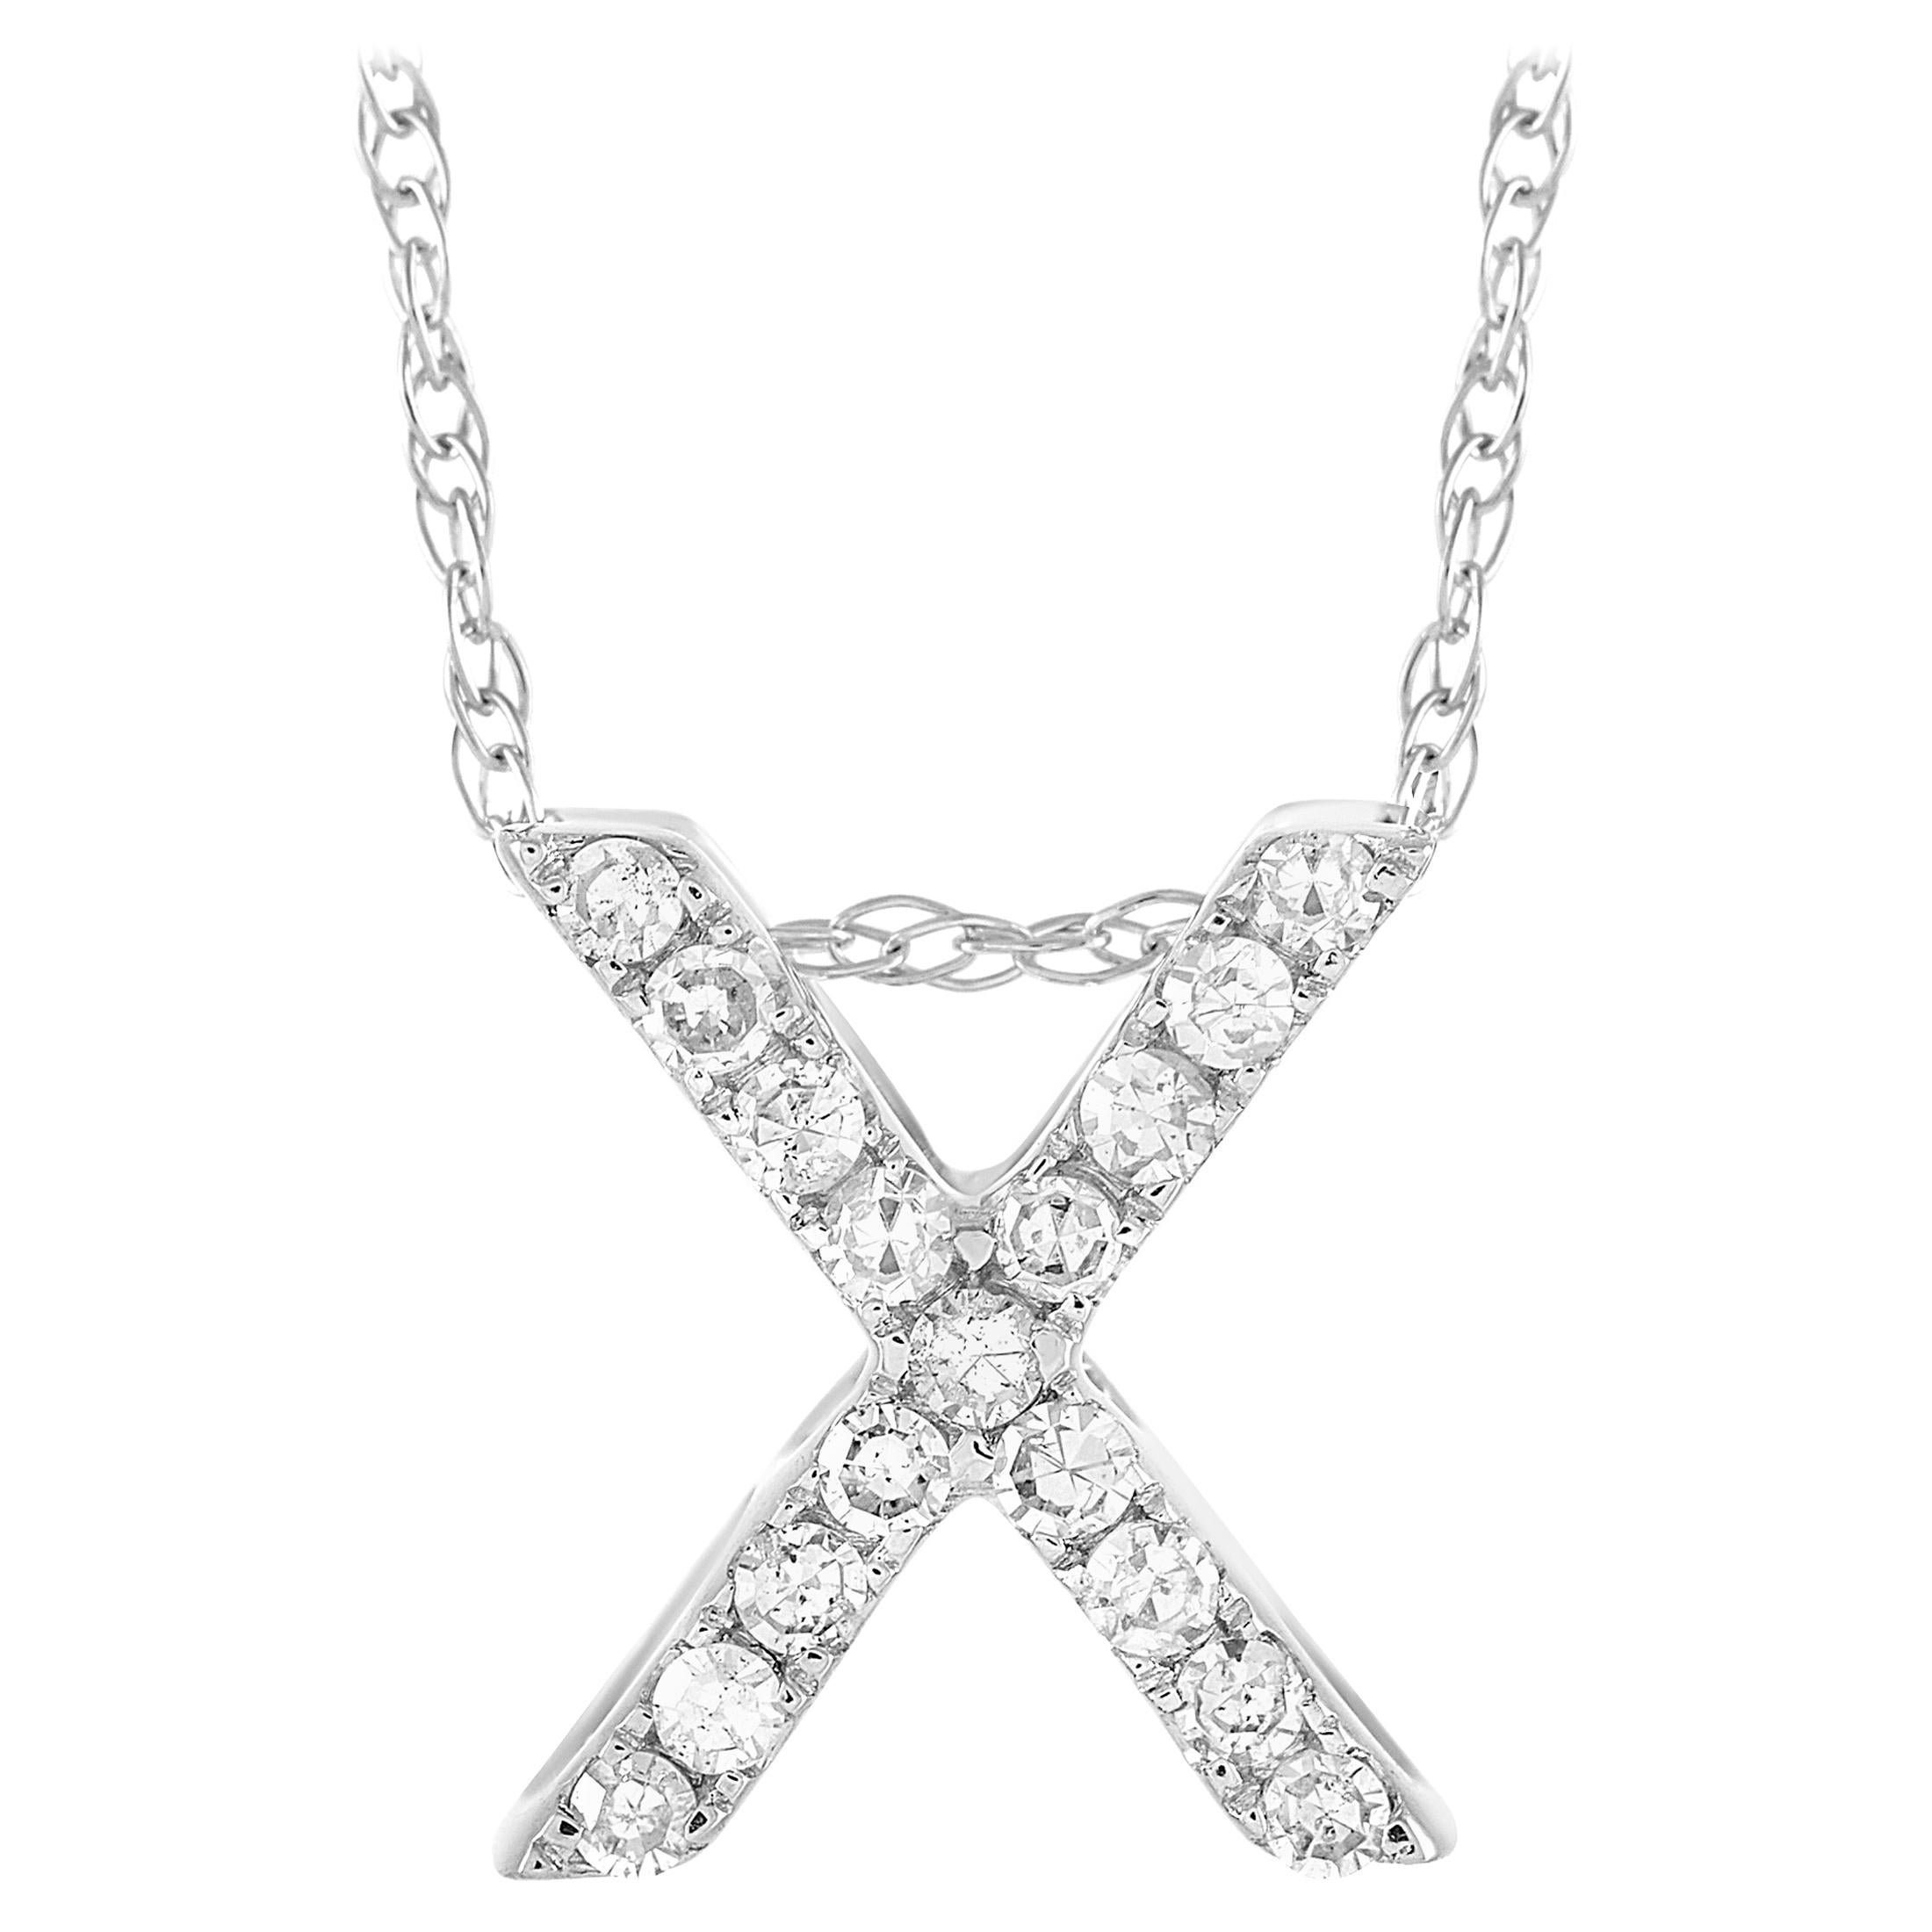 LB Exclusive 14K White Gold 0.10 Ct Diamond Initial ‘X’ Necklace